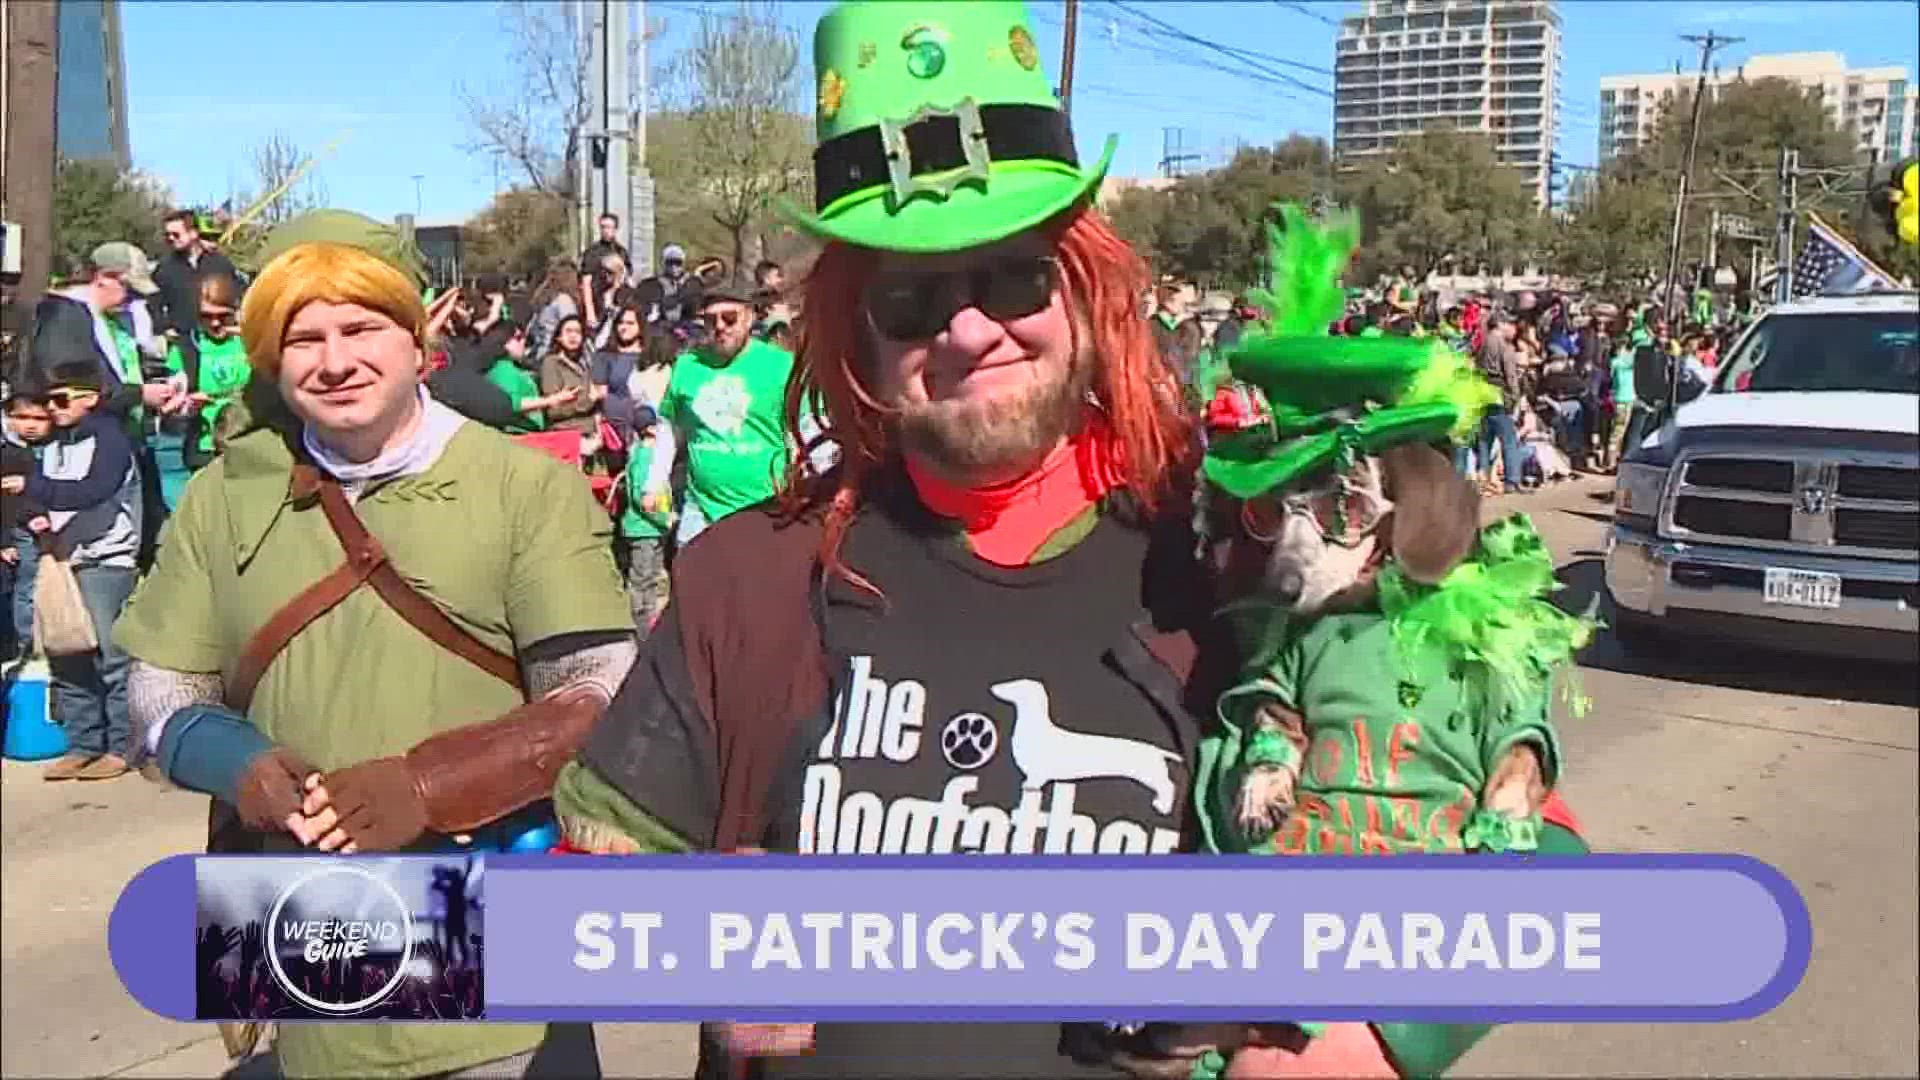 This weekend is the Dallas St. Patrick's Day Parade or you can catch some live music events!